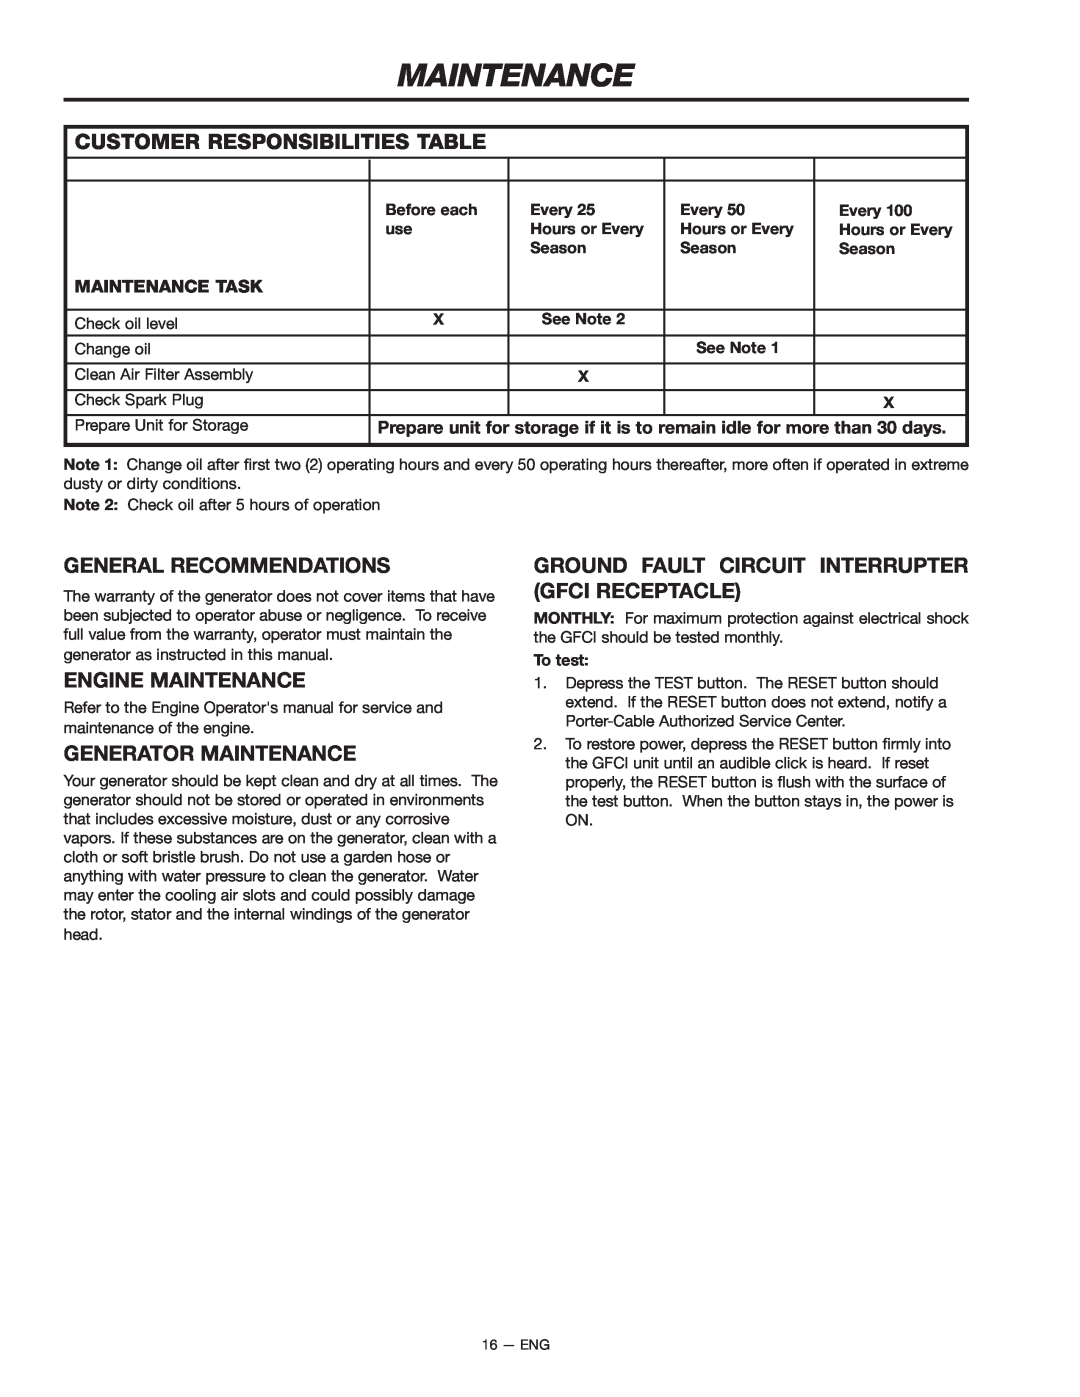 Porter-Cable H1000 Customer Responsibilities Table, General Recommendations, Engine Maintenance, Generator Maintenance 